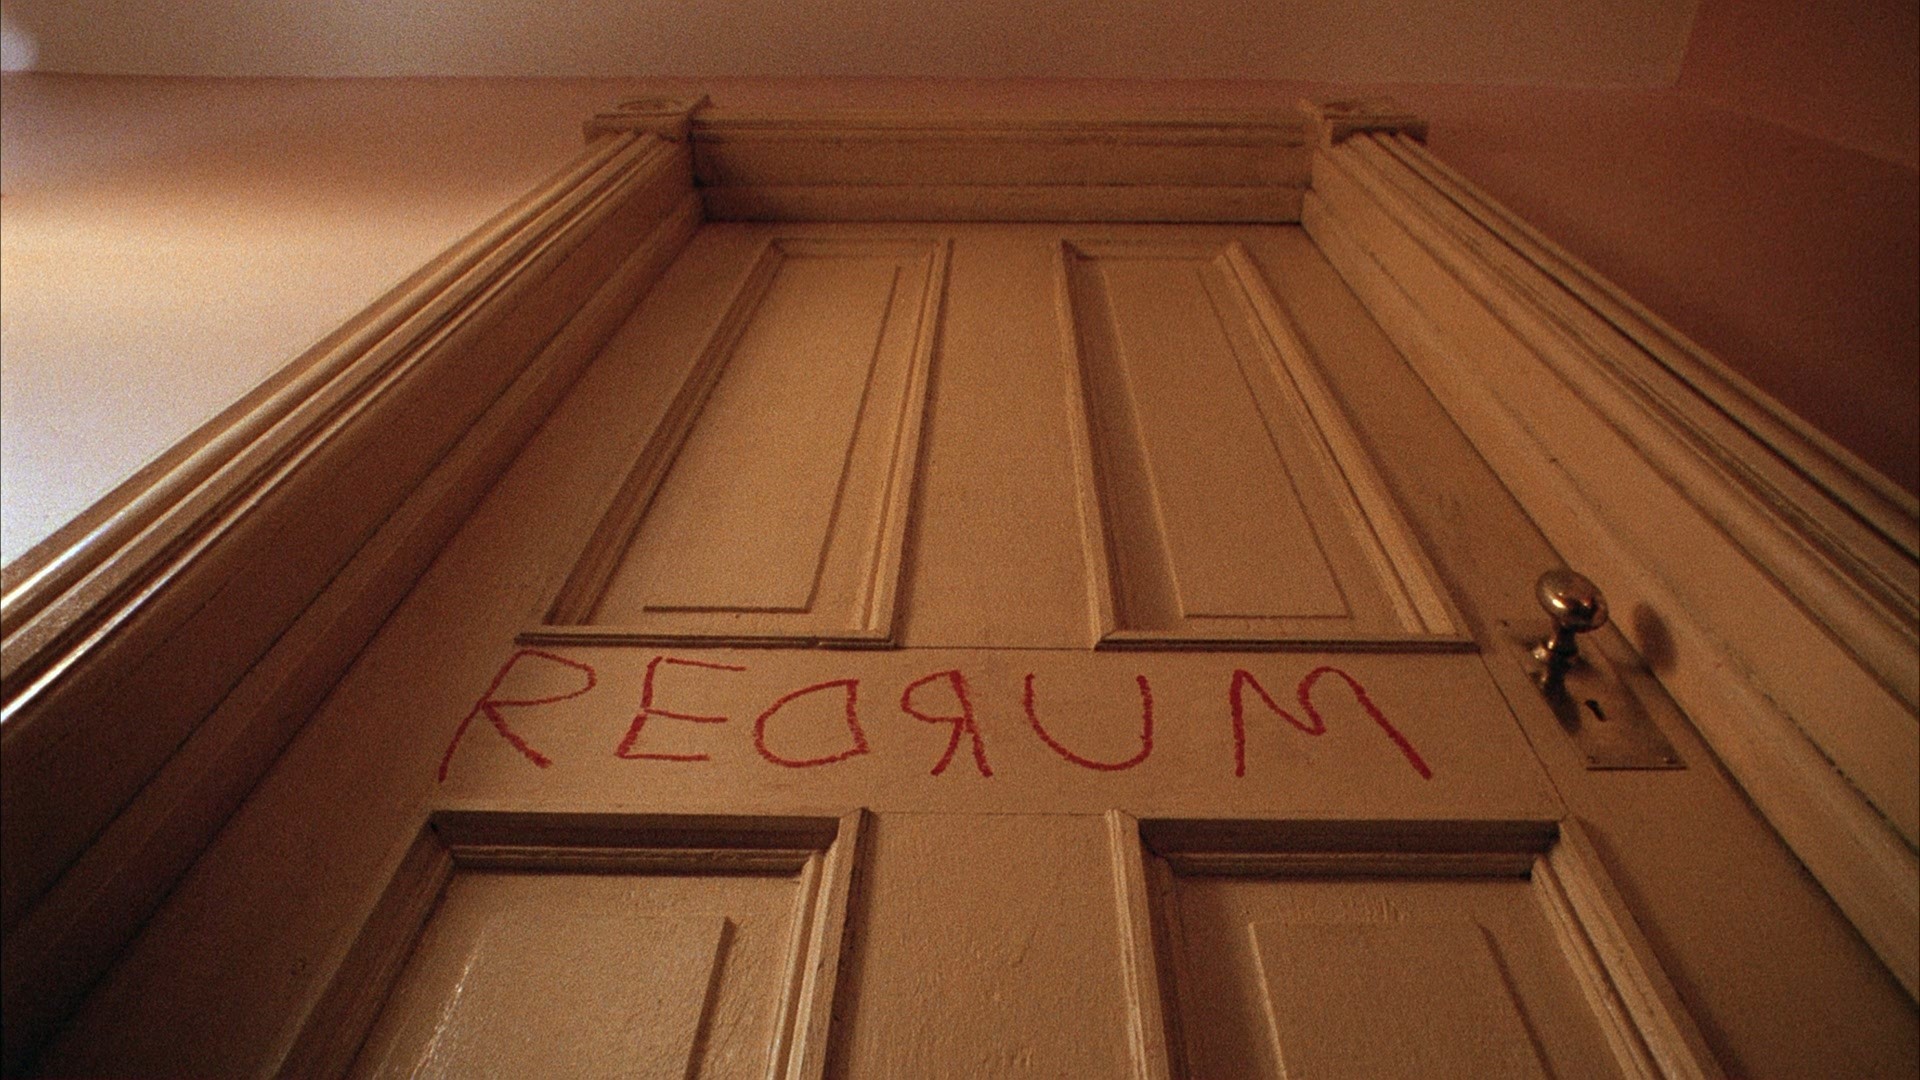 1920x1080 1920 x 1080Redrum (screen capture from The Shining) [] ...